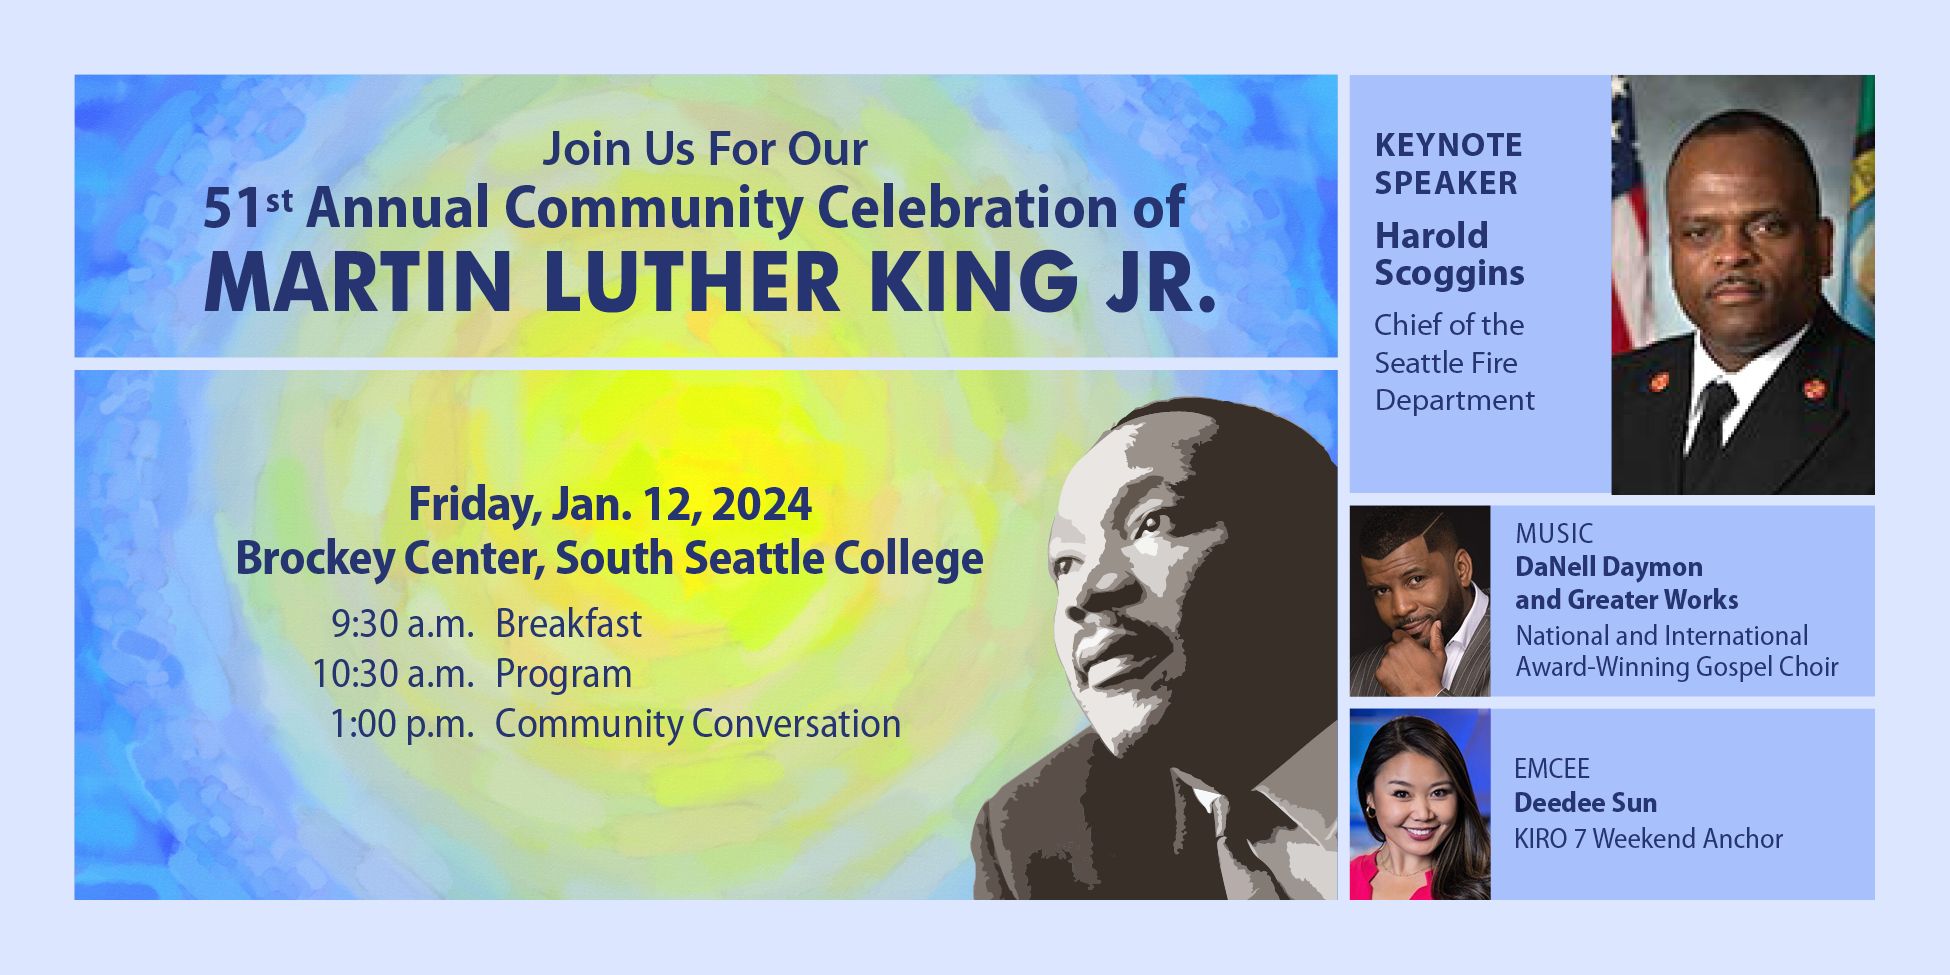 Stylized image of Martin Luther King Jr. with text: Join us for our 51st Annual Community Celebration of MARTIN LUTHER KING JR. Friday, Jan. 12, 2024, Brockey Center, South Seattle College. 9:30 a.m. Breakfast; 10:30 a.m. Program; 1:00 p.m. Community Conversation. KEYNOTE SPEAKER Harold Scoggins, Chief of the Seattle Fire Department. MUSIC by DaNell Daymon and Greater Works, Award-Winning Gospel Choir. EMCEE Deedee Sun, KIRO 7 weekend anchor.